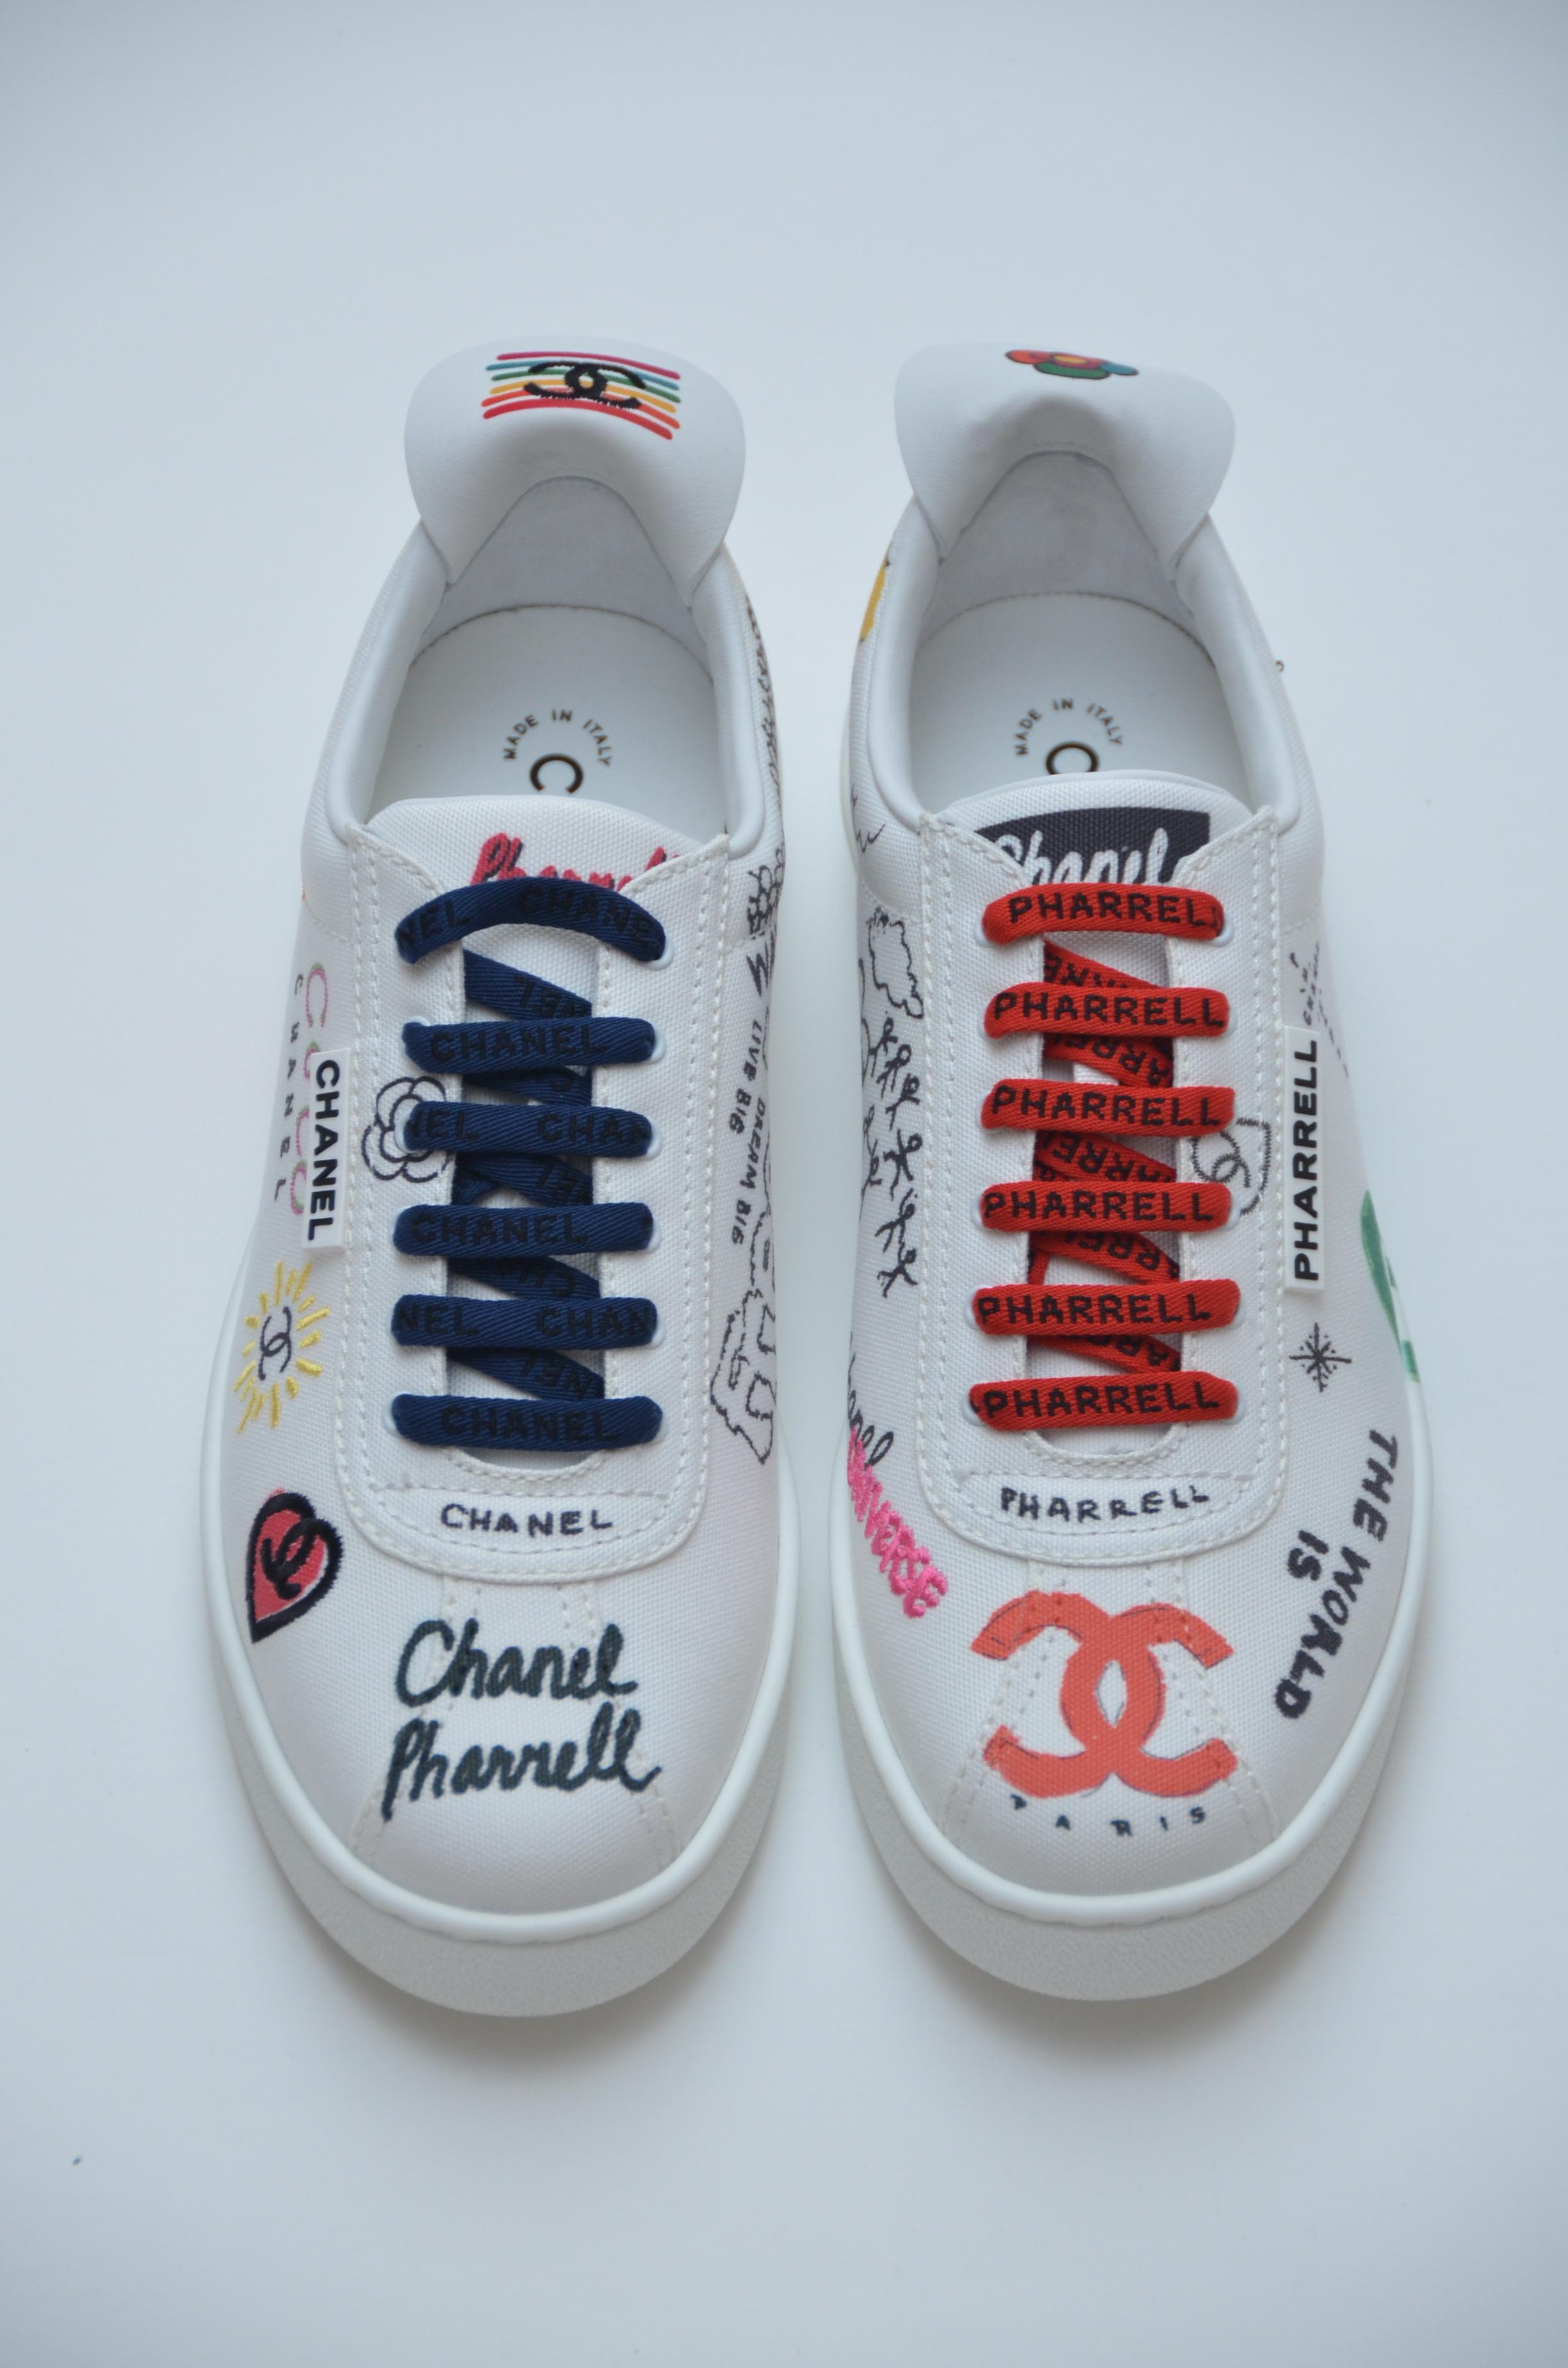 Chanel Pharrell Sneakers - 2 For Sale on 1stDibs